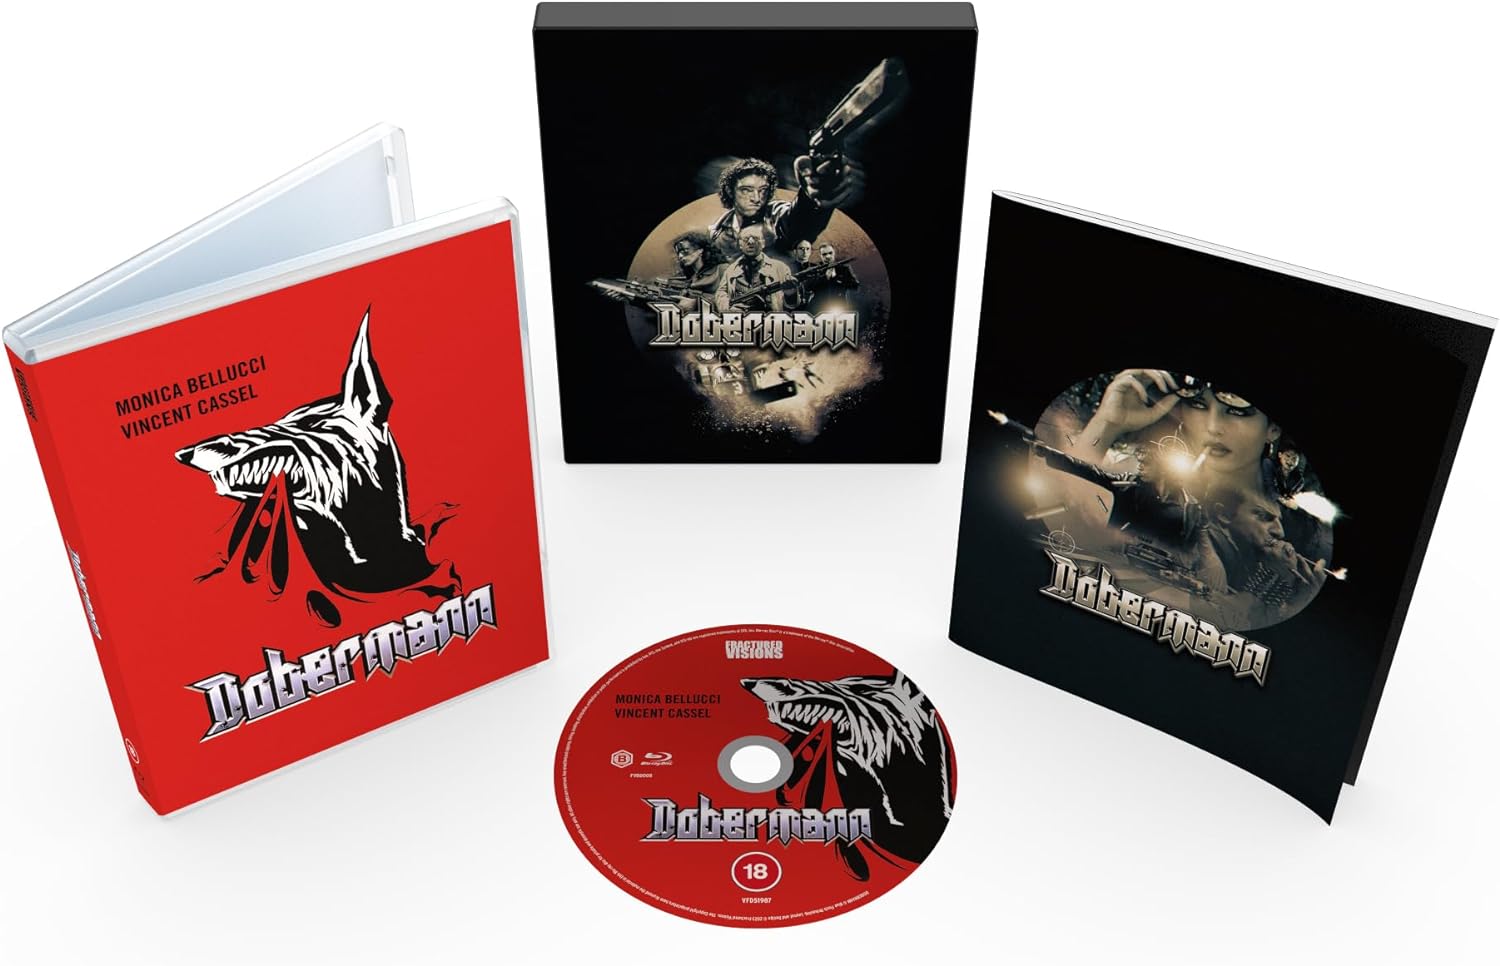 Dobermann Limited Edition Blu-raywith Slipcase (Fractured Visions 